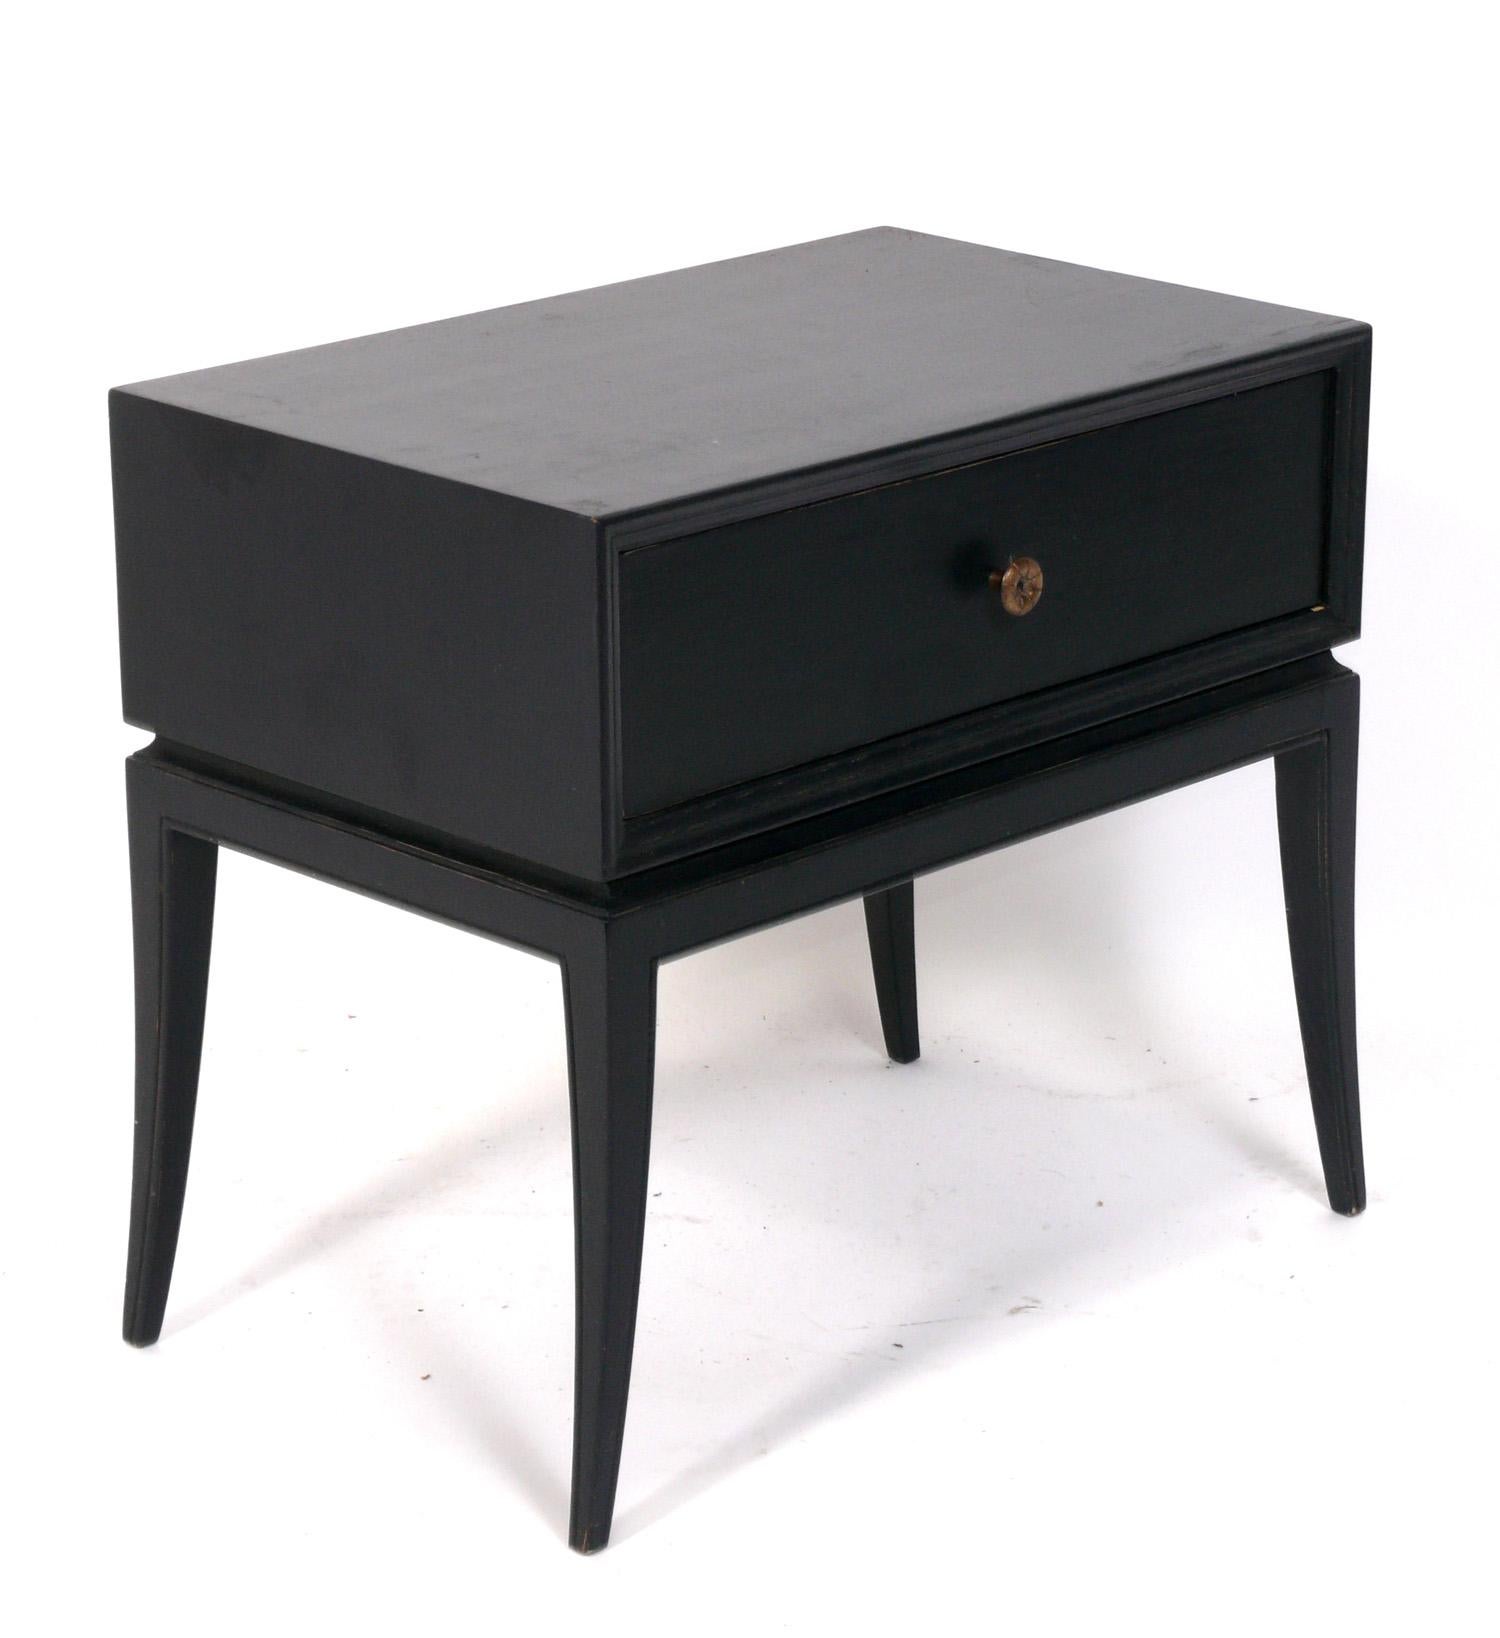 Pair of Elegant End Tables or Nightstands, designed by Tommi Parzinger for Charak, American, circa 1960s. These are currently being refinished and can be completed in your color choice of wood stain or lacquer. The price noted INCLUDES refinishing